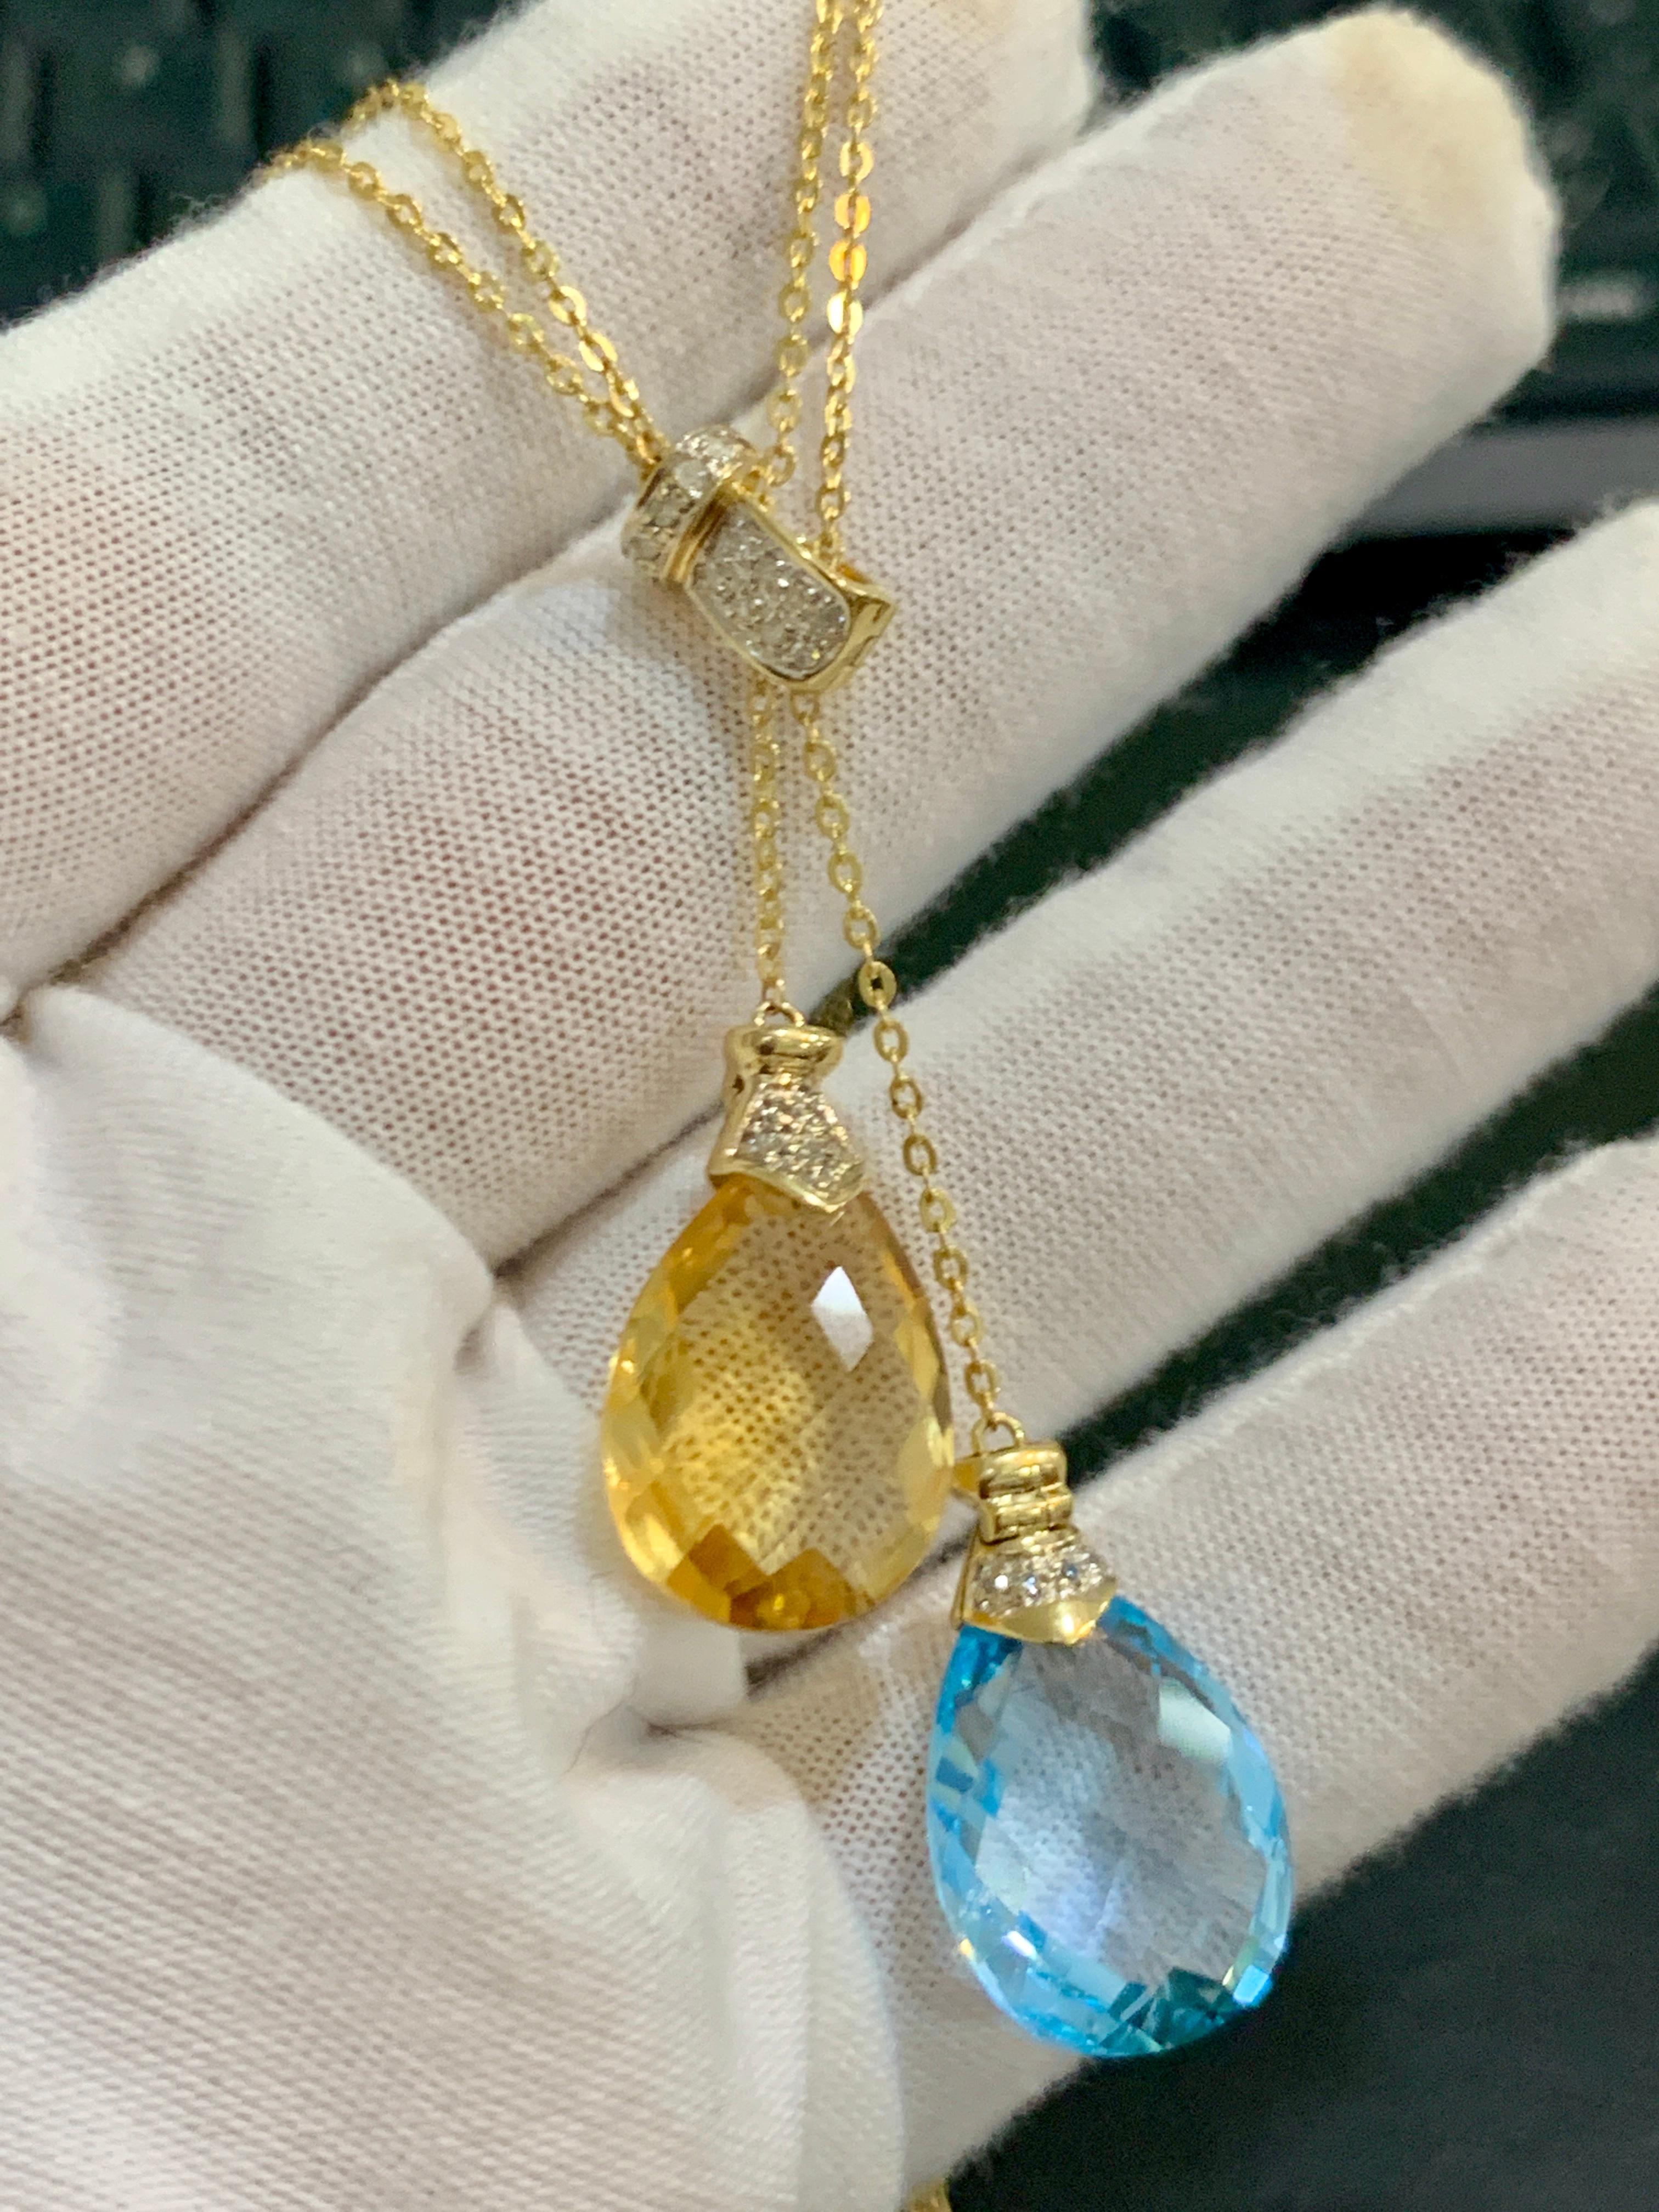 Pear Cut Checkerboard Citrine and Blue Topaz Pendent/Necklace 14 Karat Gold Double Chain